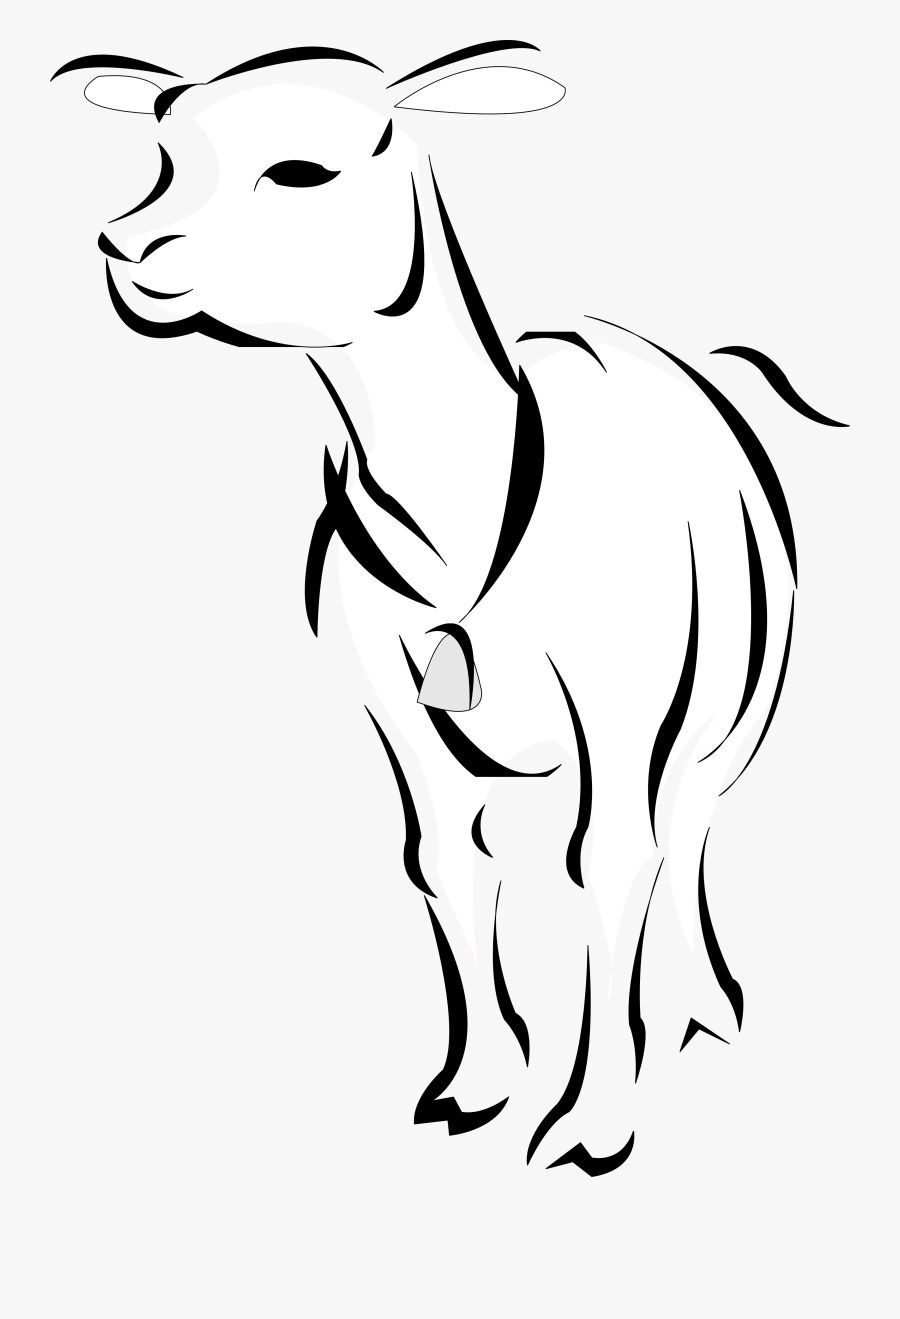 Artfavor Lamb Black White - Sheep With A Bell, Transparent Clipart